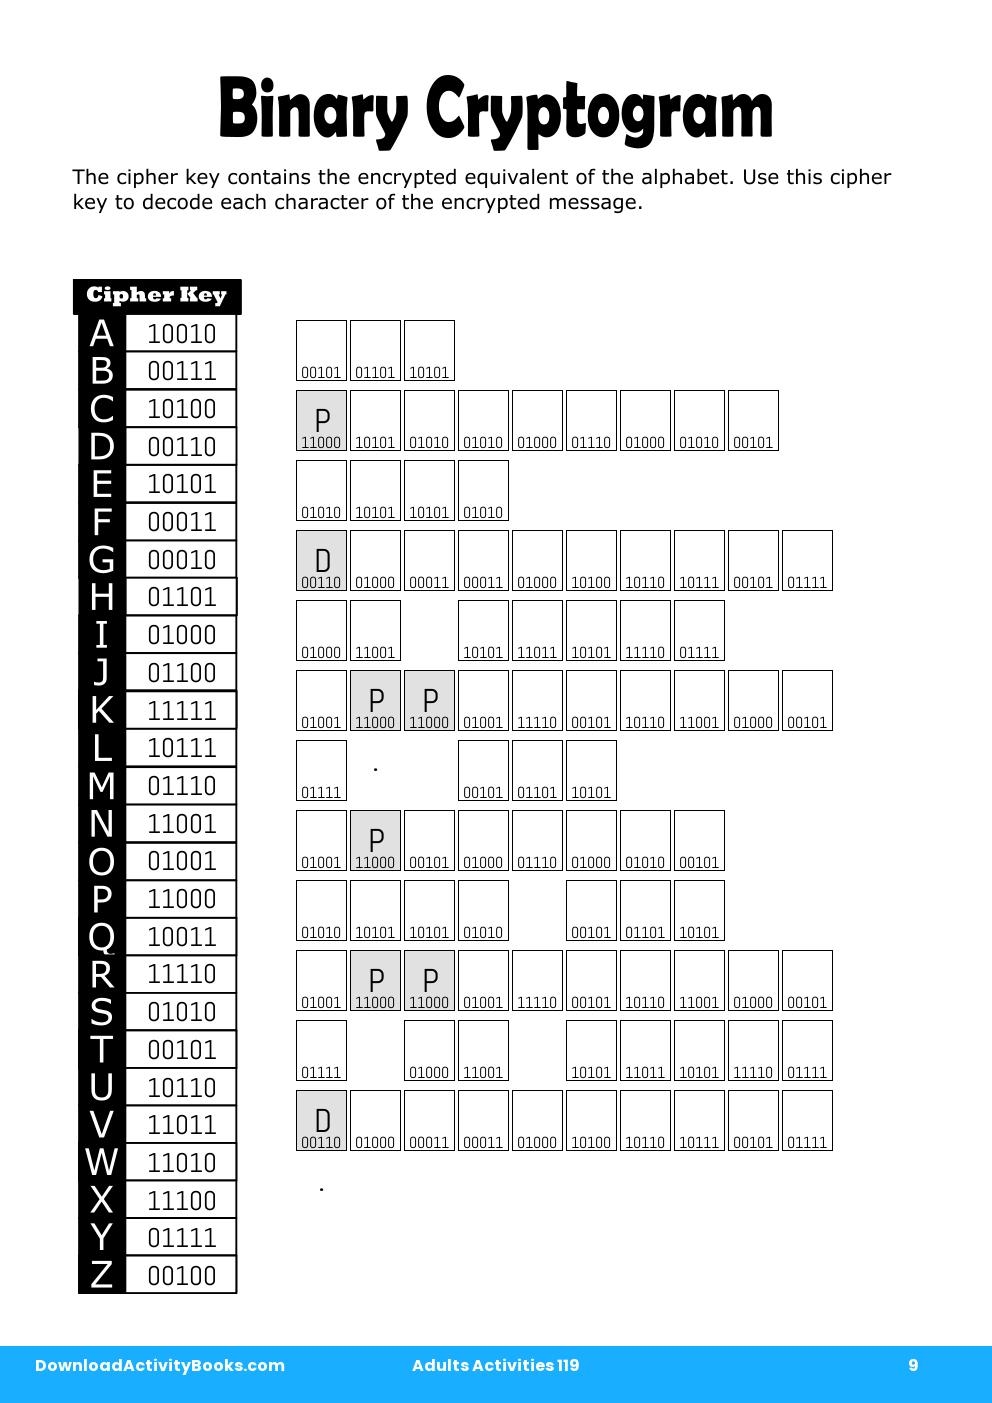 Binary Cryptogram in Adults Activities 119